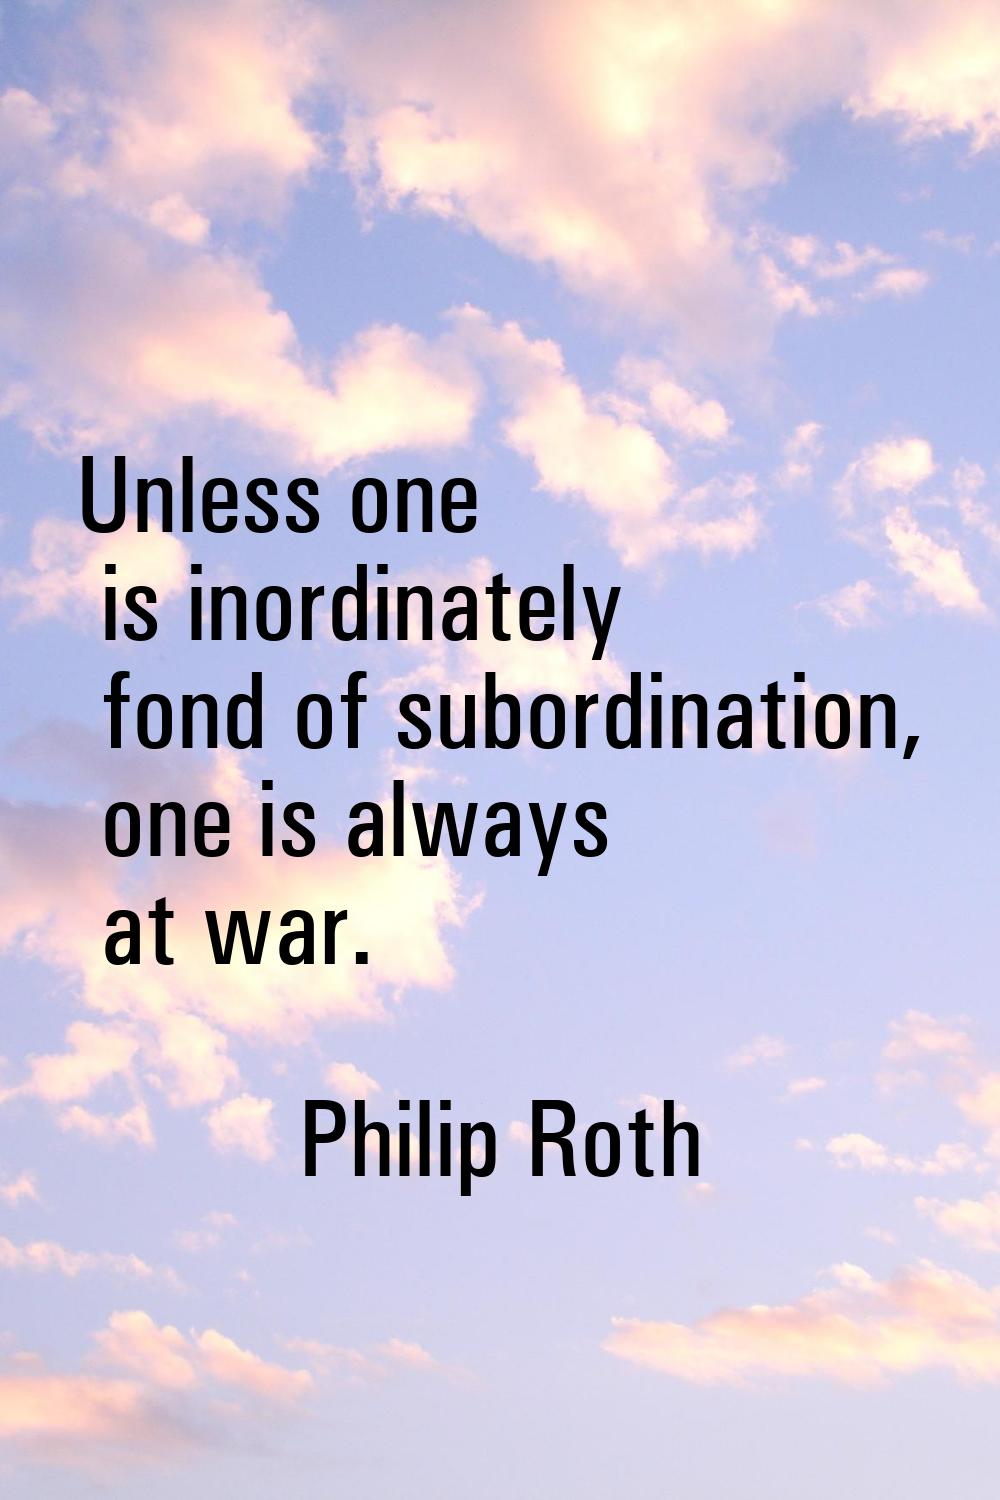 Unless one is inordinately fond of subordination, one is always at war.